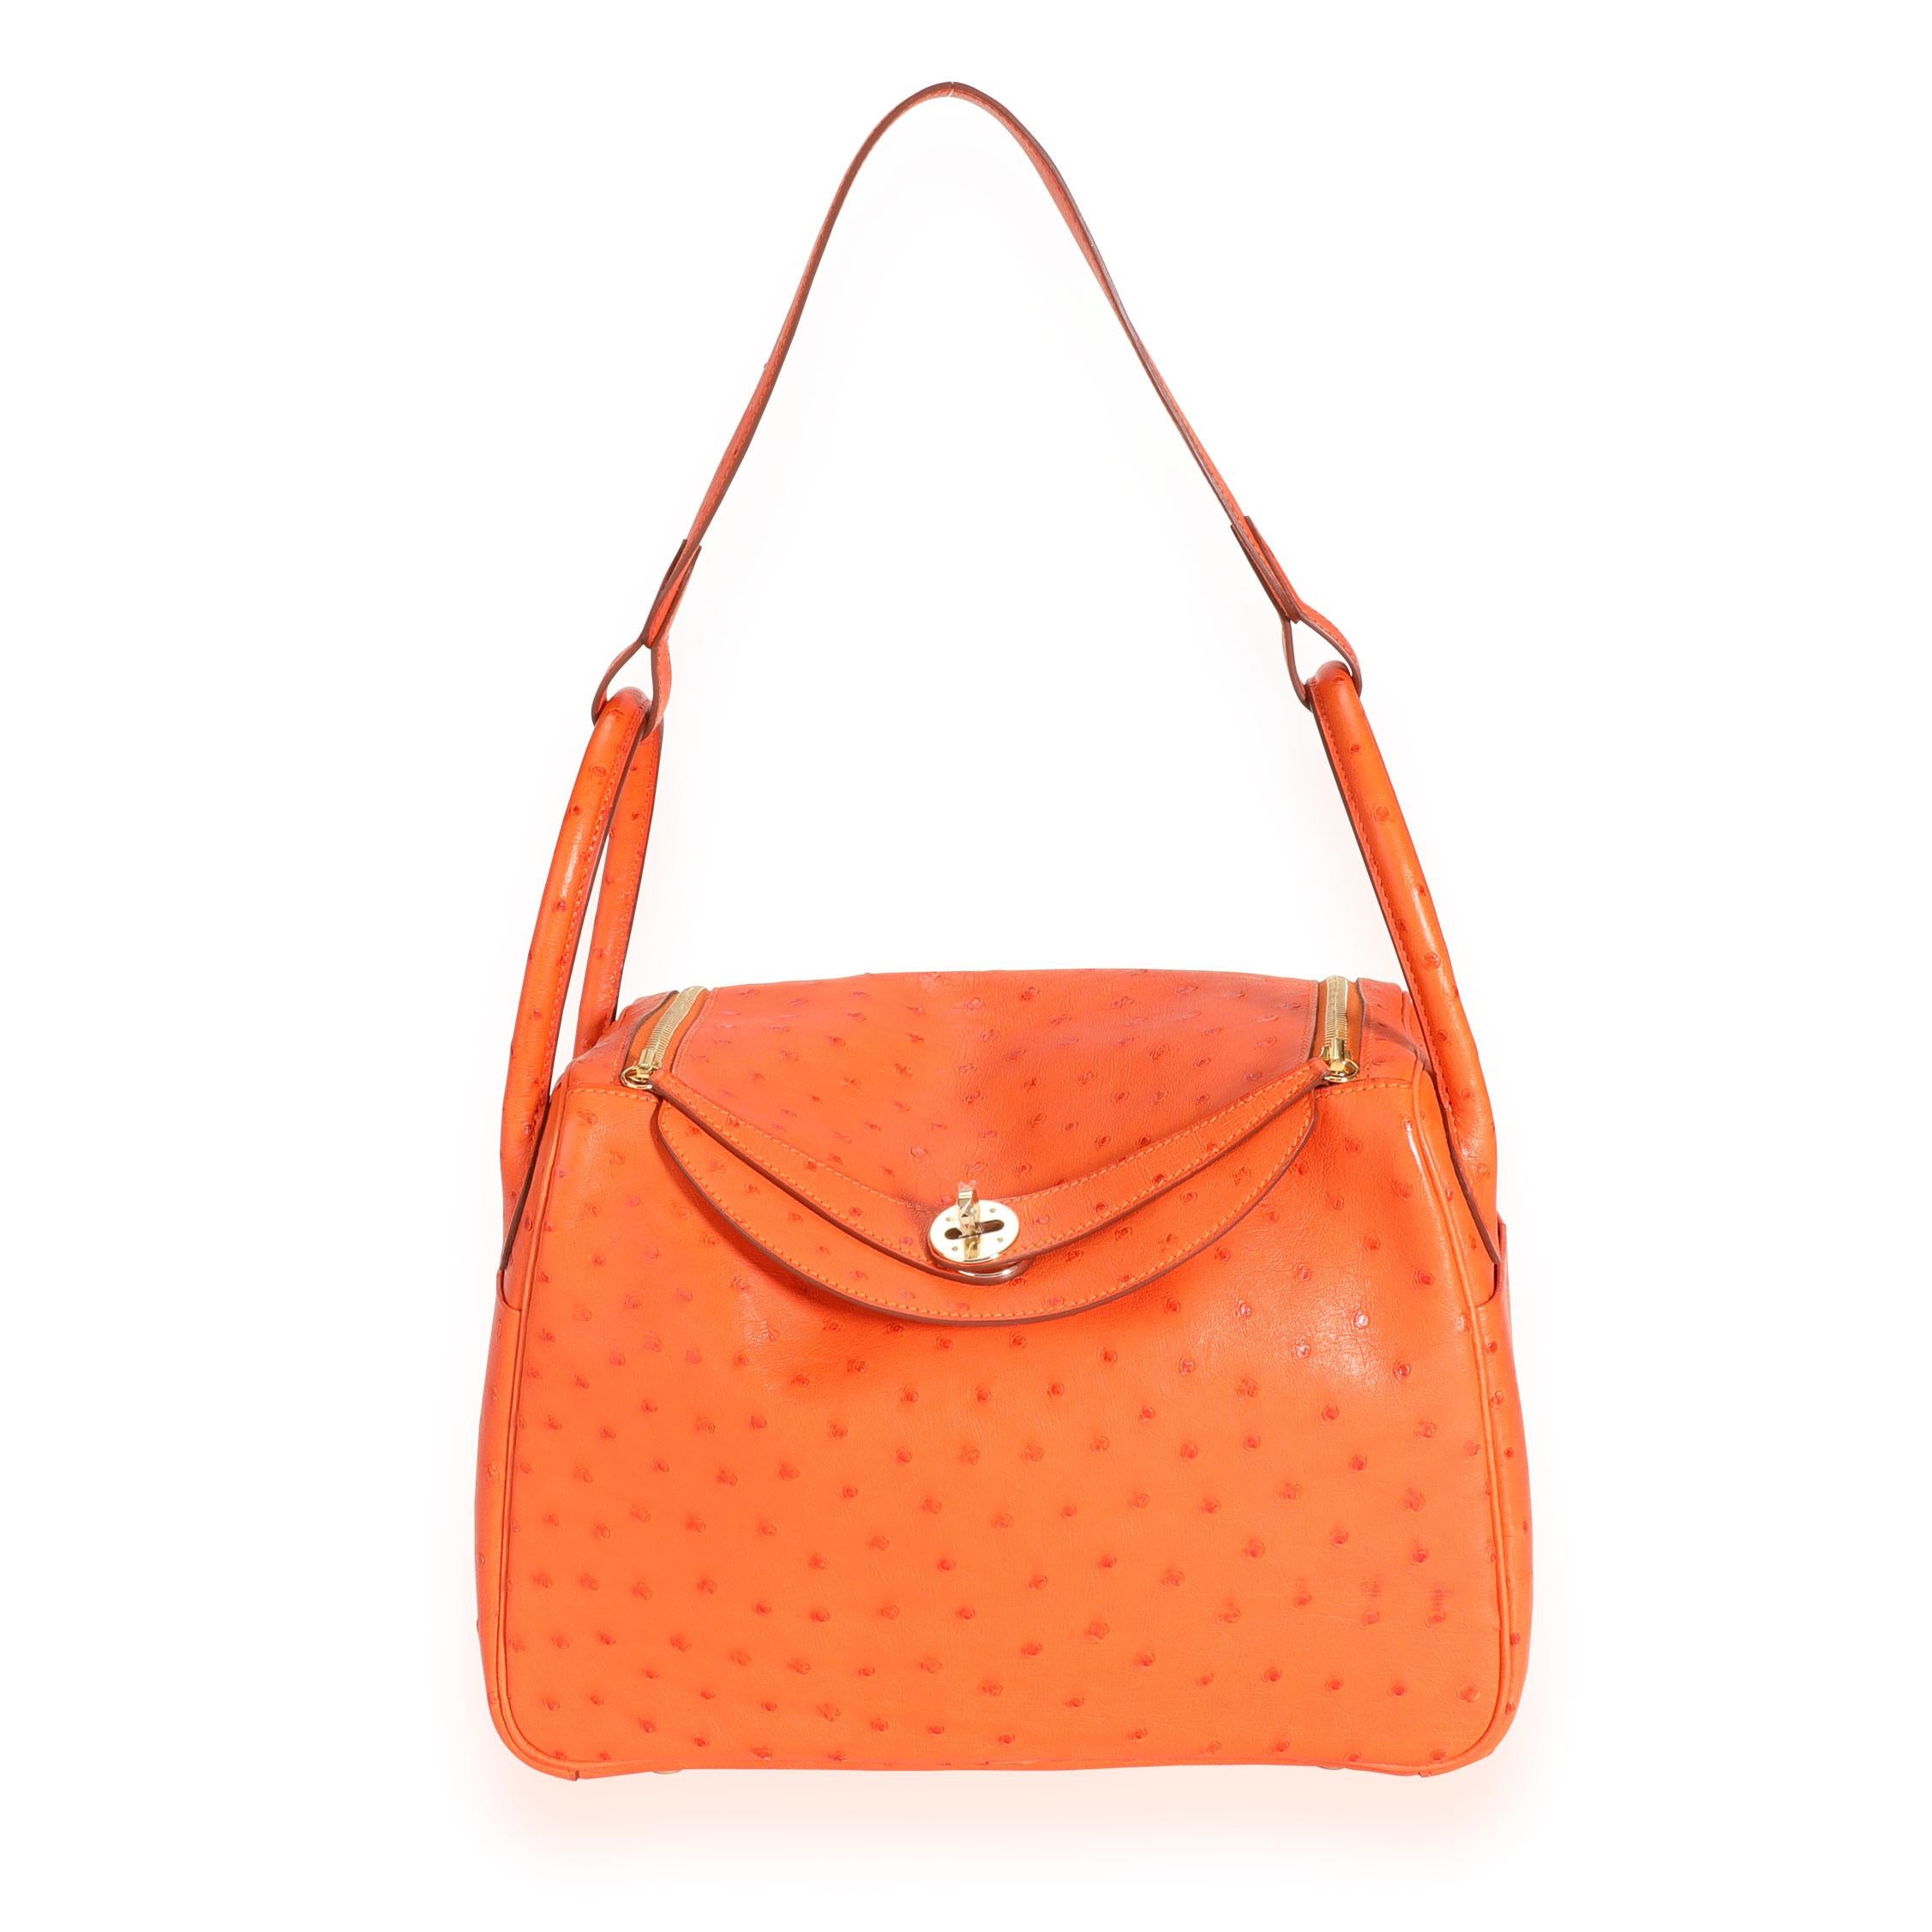 Hermès Tangerine Ostrich Lindy 30 GHW
SKU: 111418
MSRP:  
Condition: Pre-owned (3000)
Condition Description: 
Handbag Condition: Mint
Condition Comments: Mint Condition. Plastic on hardware. No visible signs of wear. Final sale. Please note: this